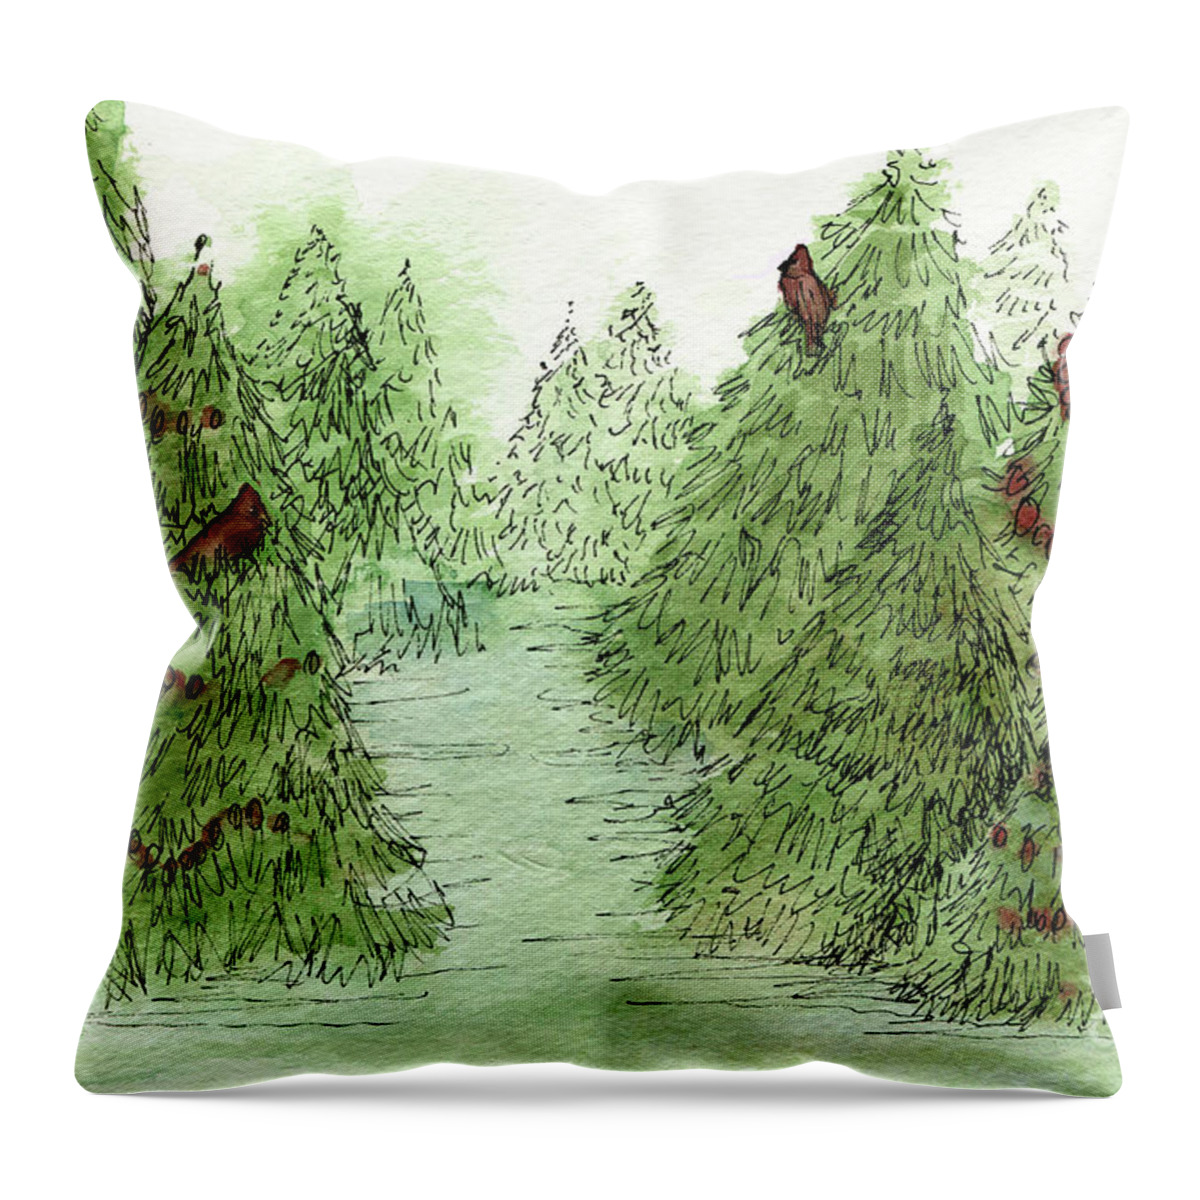 Holiday Trees Throw Pillow featuring the painting Holiday Trees Woodland Landscape Illustration by Laurie Rohner